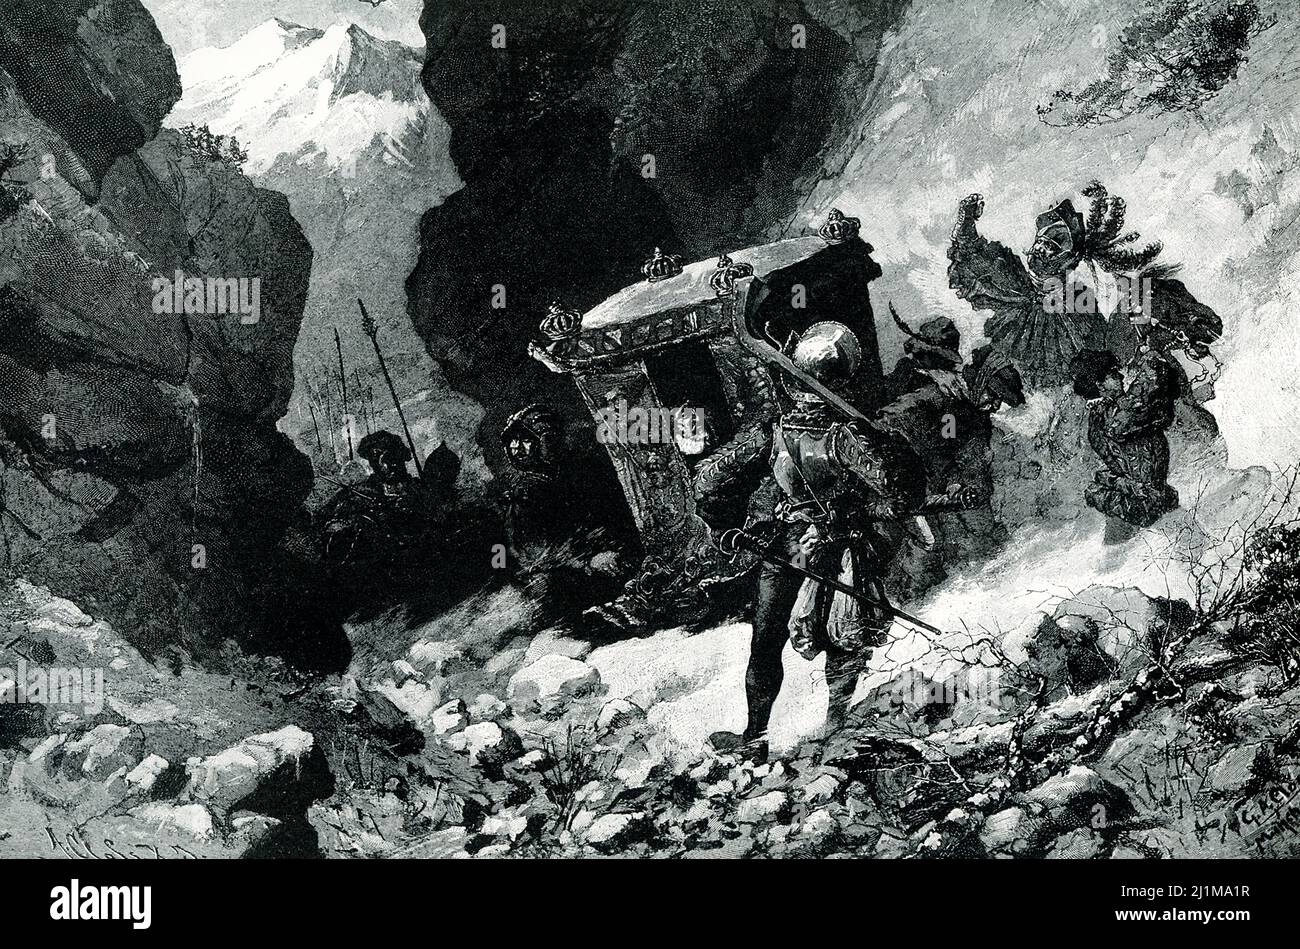 The 1906 caption reads: “Flight of Charles V. The Emperor Charles V the mightiest monarch of his time in Europe, had to flee from a sudden and unexpected German rebellion. Suffering severely from the gout, he was jolted in frantic haste over the Alpine passes to a safer land. His enemies could, perhaps, have captured him, but purposely delayed pursuit, saying they had “no cage for so large a bird.” This was the Second Schmalkaldic War, also known as the Princes' Revolt, an uprising of German Protestant princes led by elector Maurice of Saxony against the Catholic emperor Charles V that broke o Stock Photo